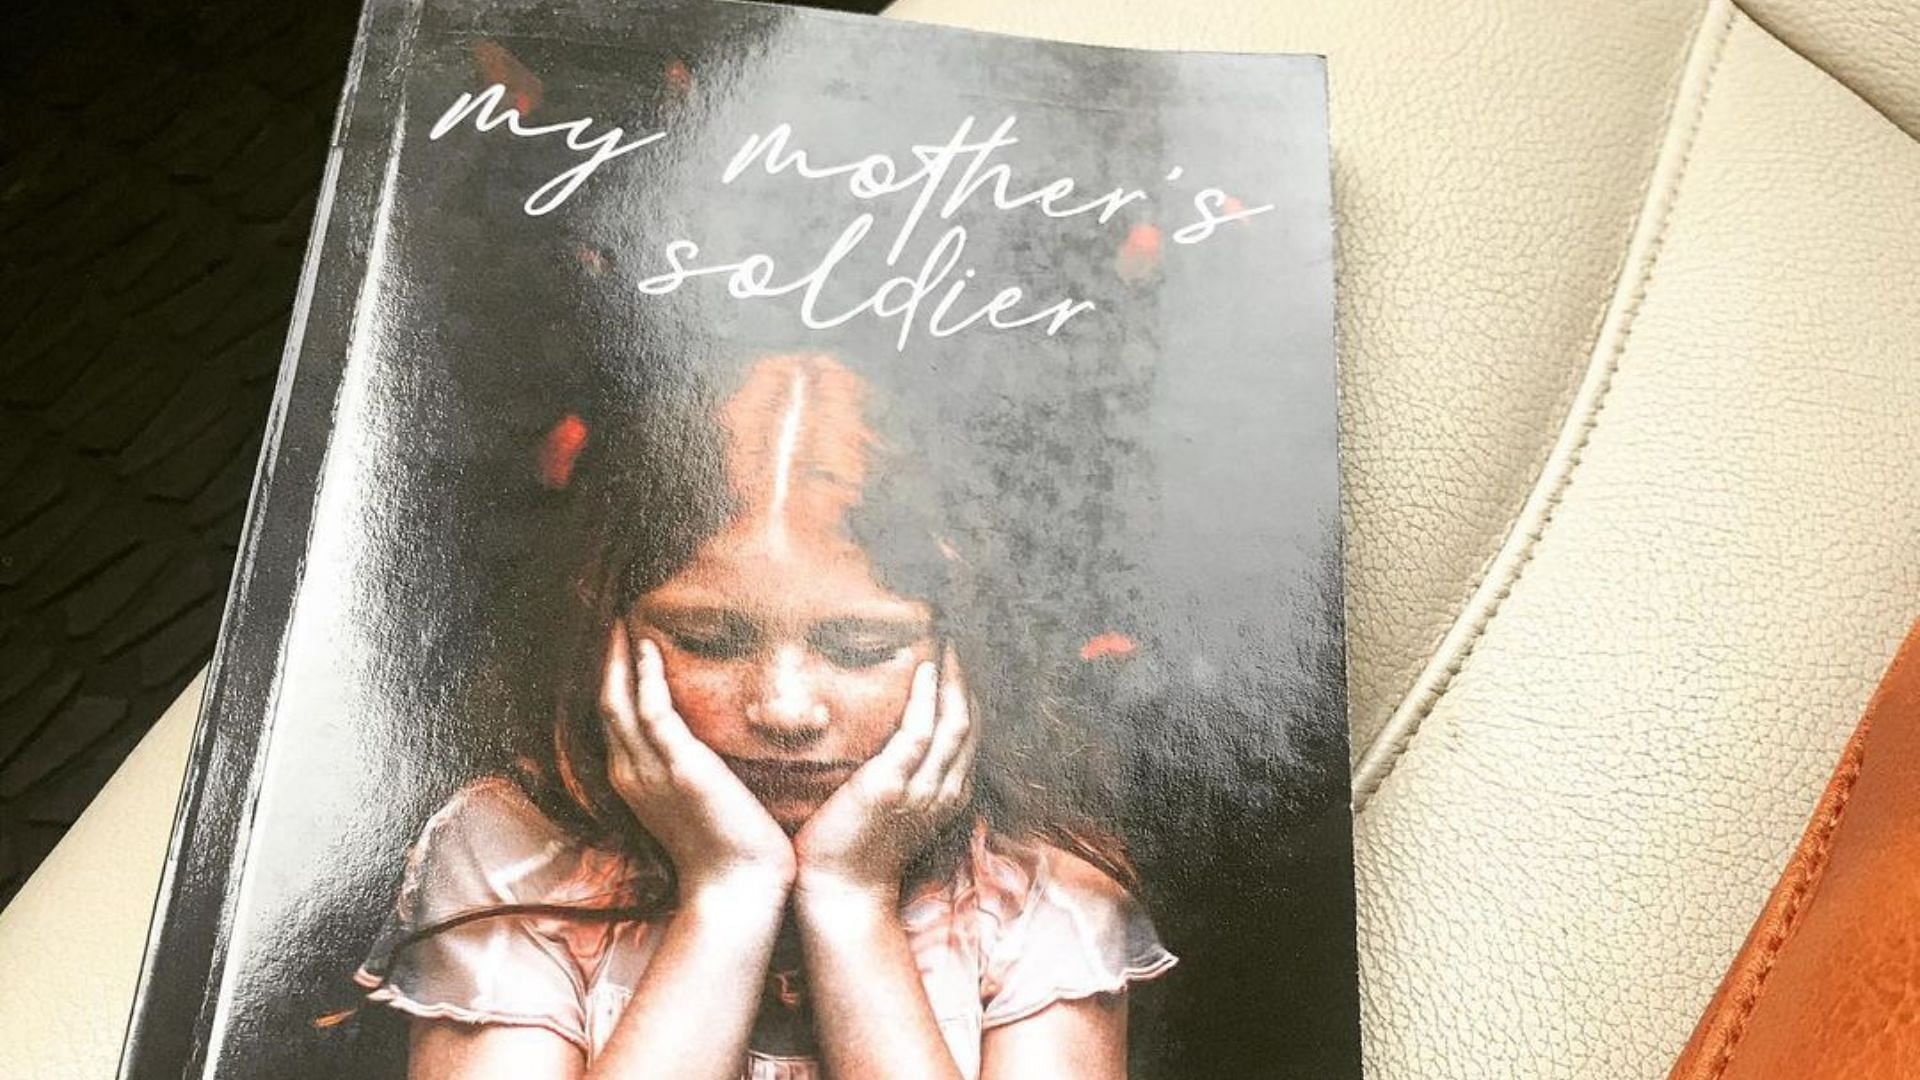 A still of Mary Elizabeth Bailey's memoir 'My Mother's Soldier' (Image via mymotherssoldier/Instagram)